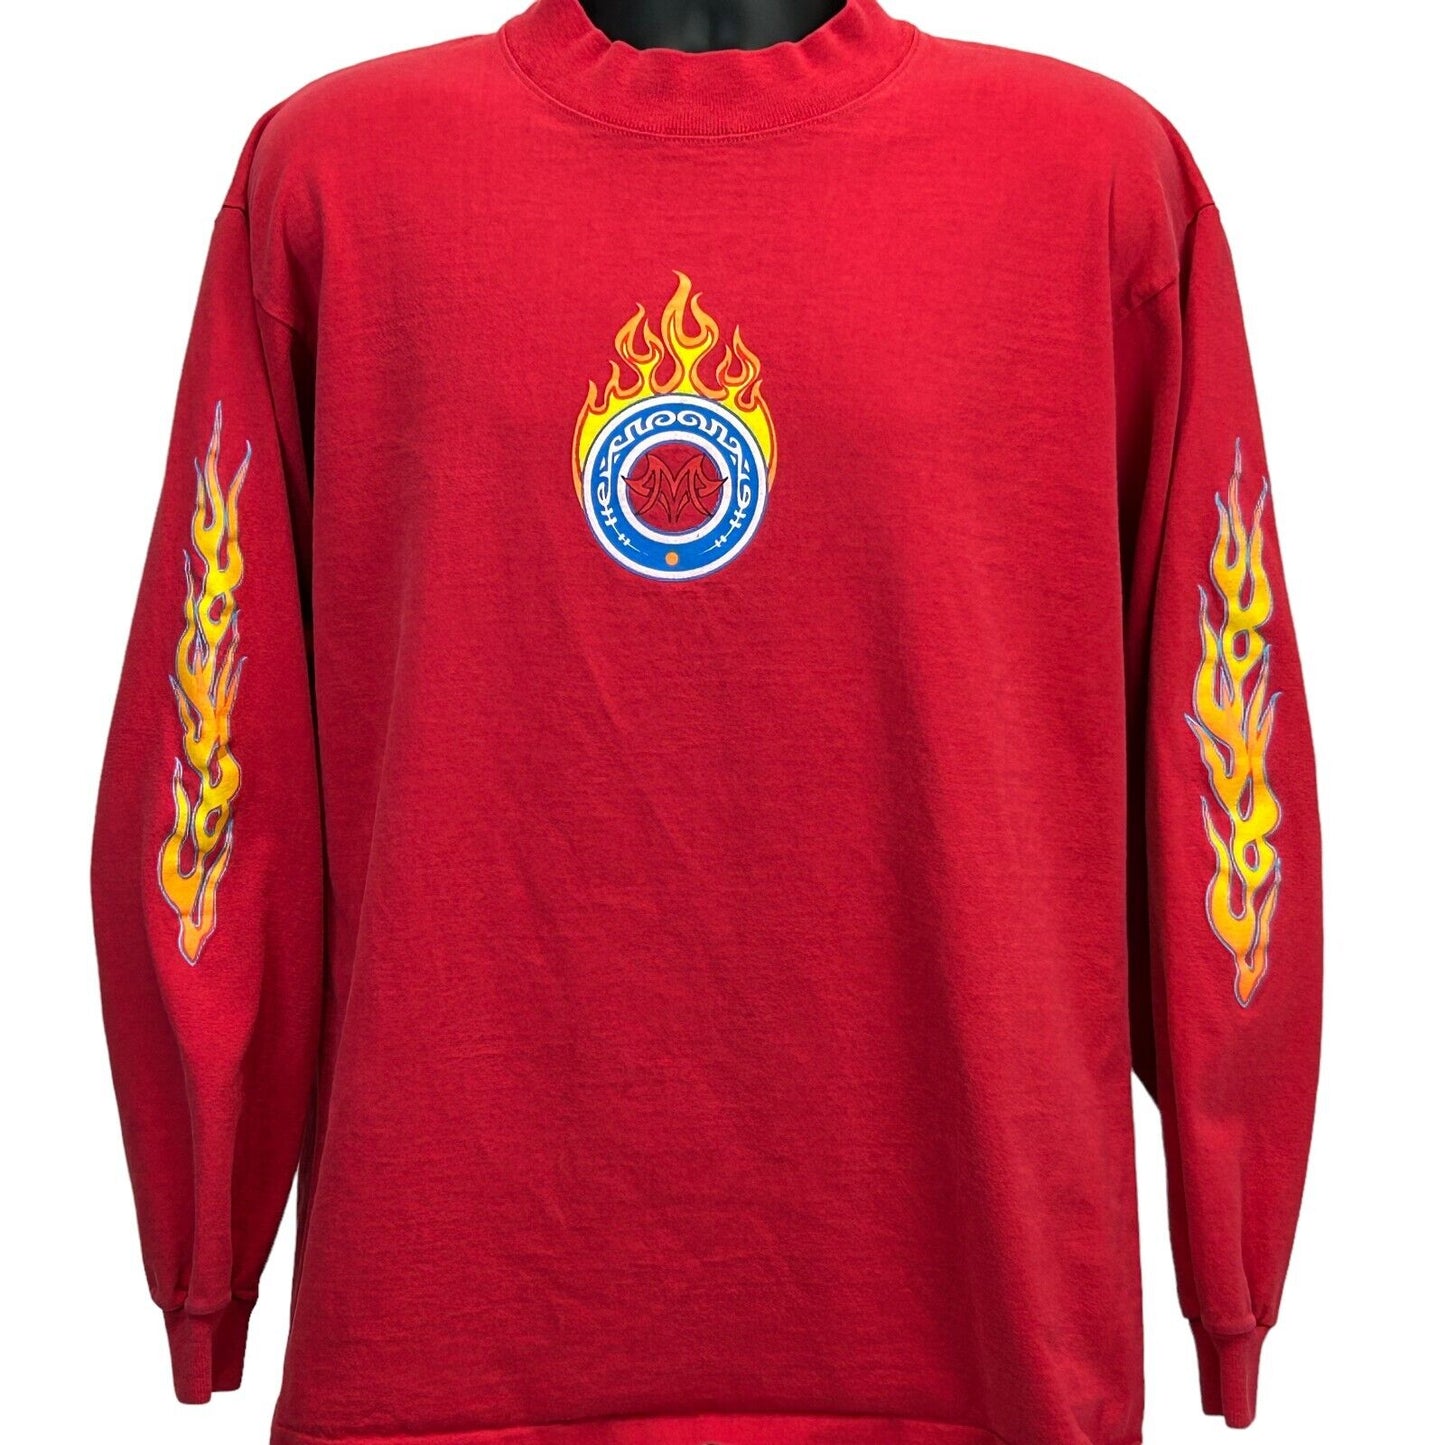 Fire Flames Vintage 90s T Shirt Streetwear Red Long Sleeve Made In USA Tee Large